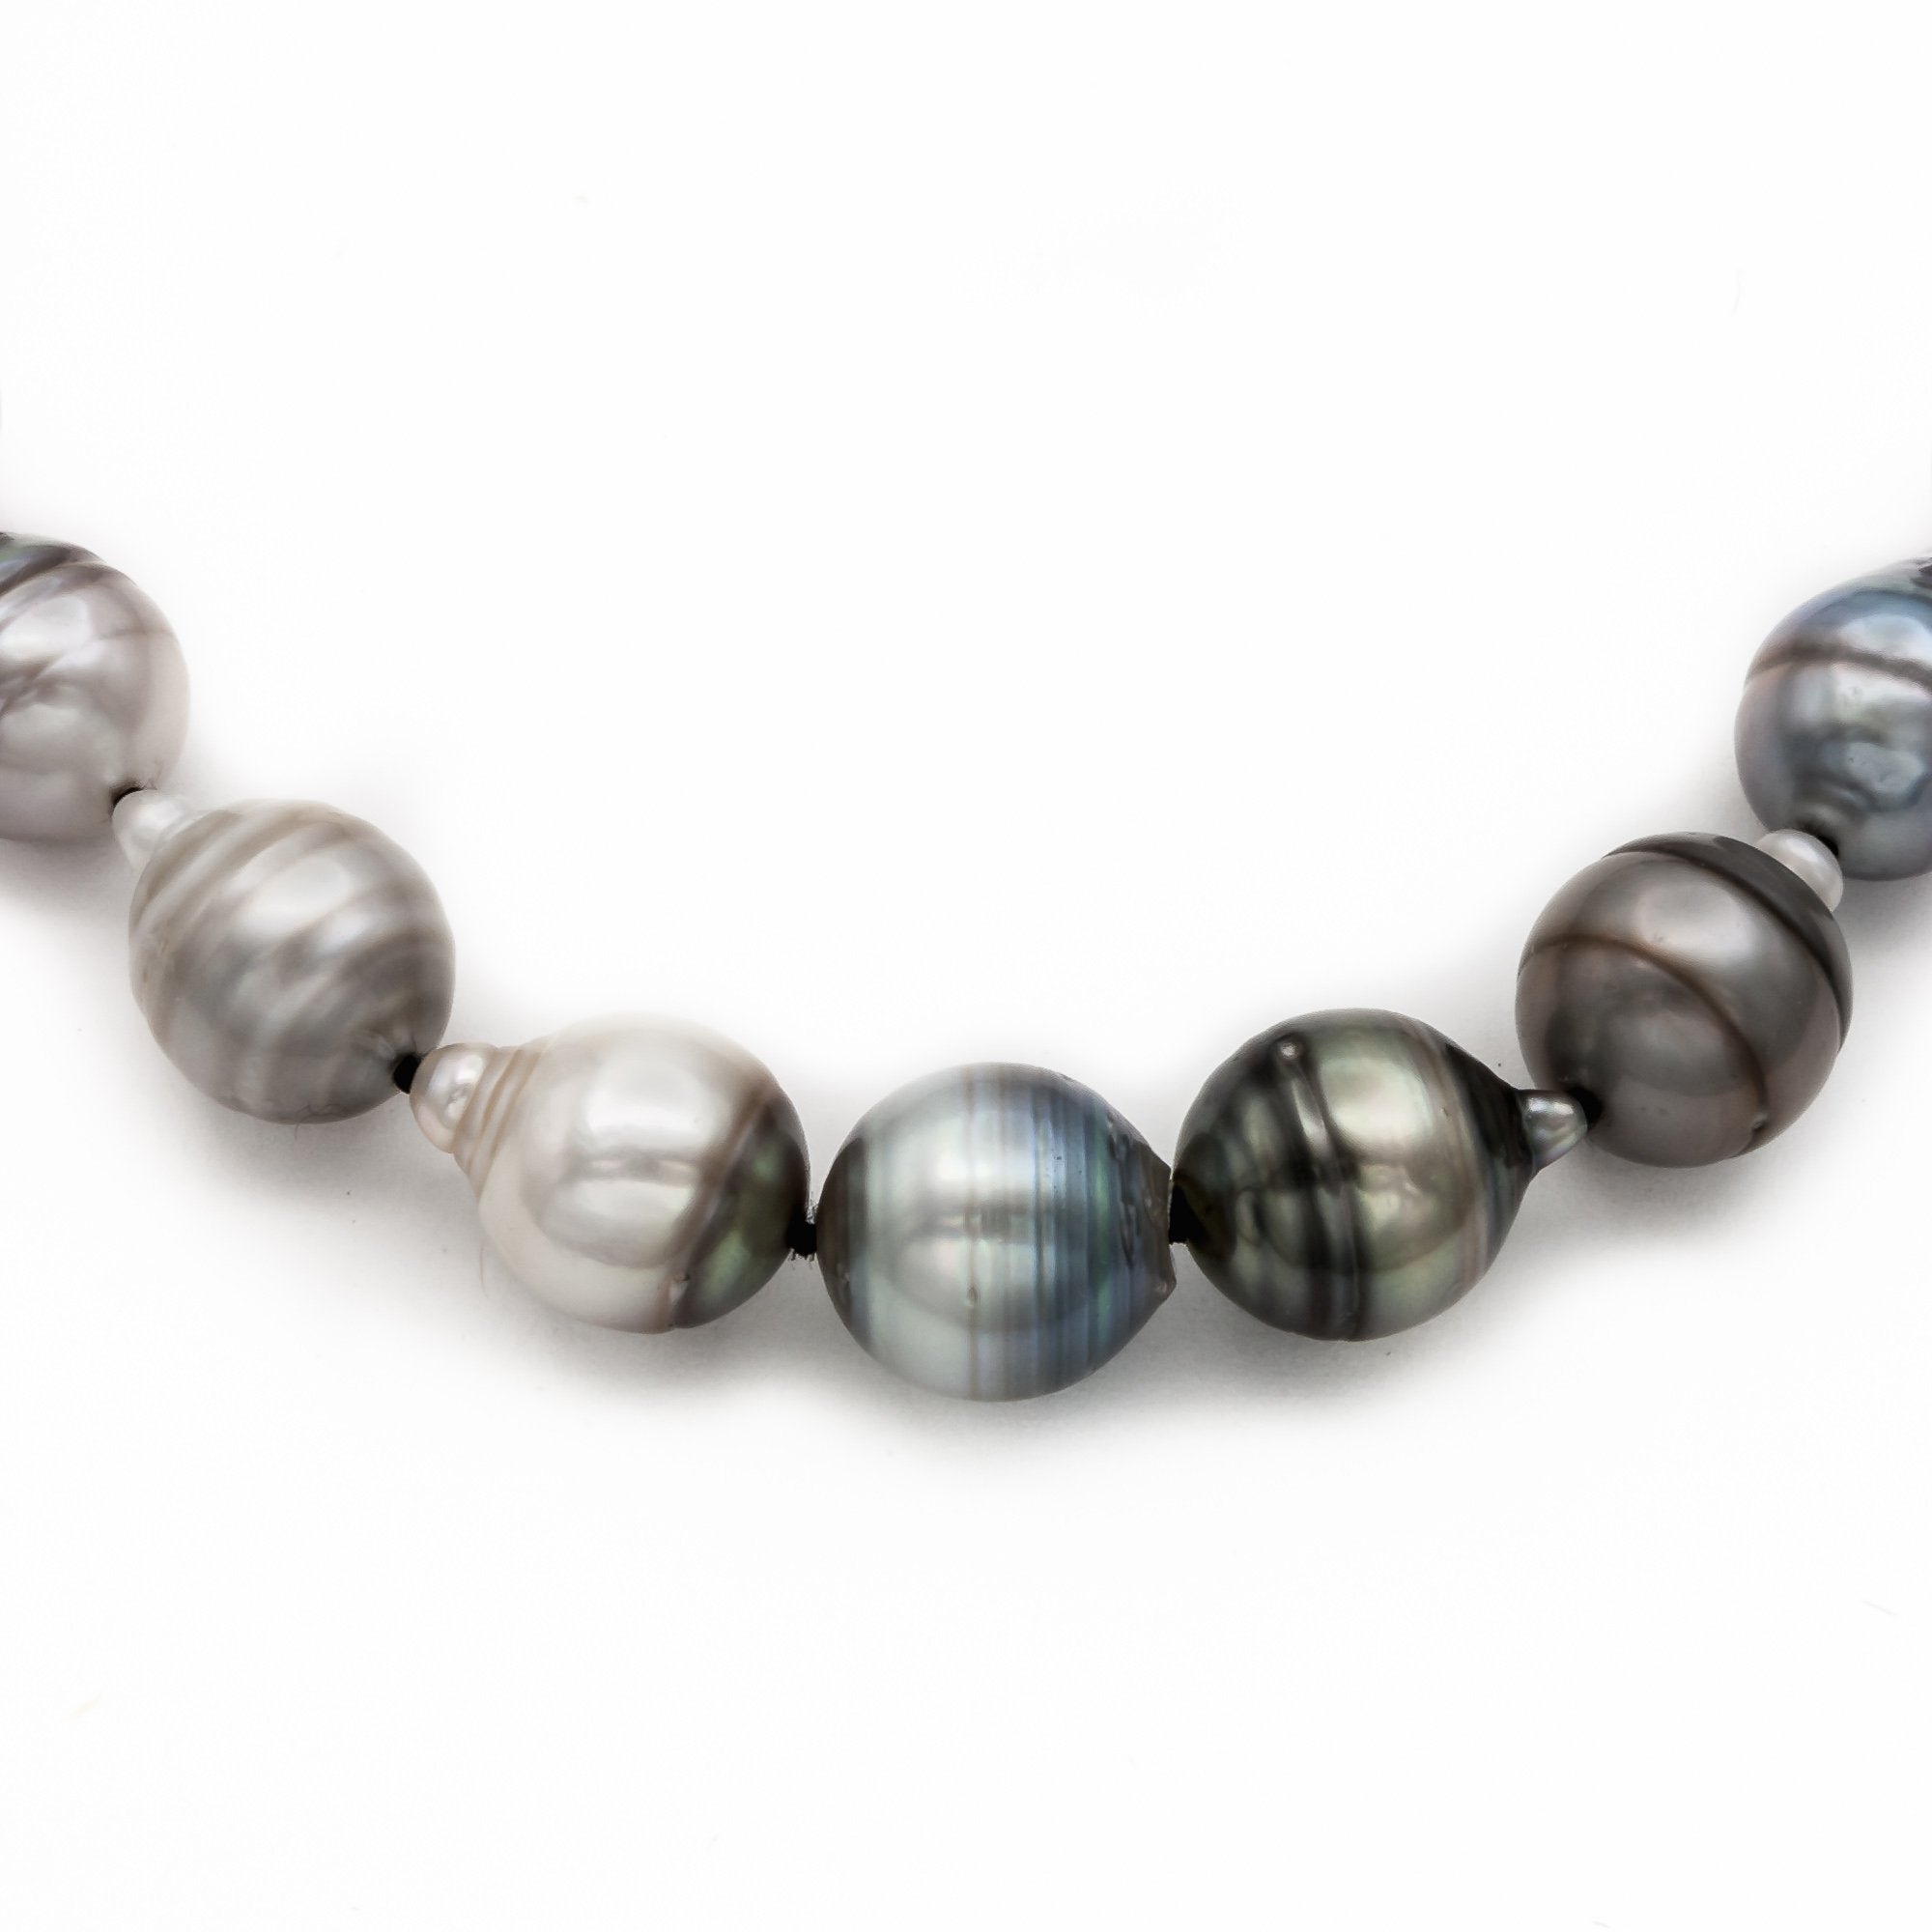 Hand-wired Tahitian pearl necklace – Barb McSweeney Jewelry